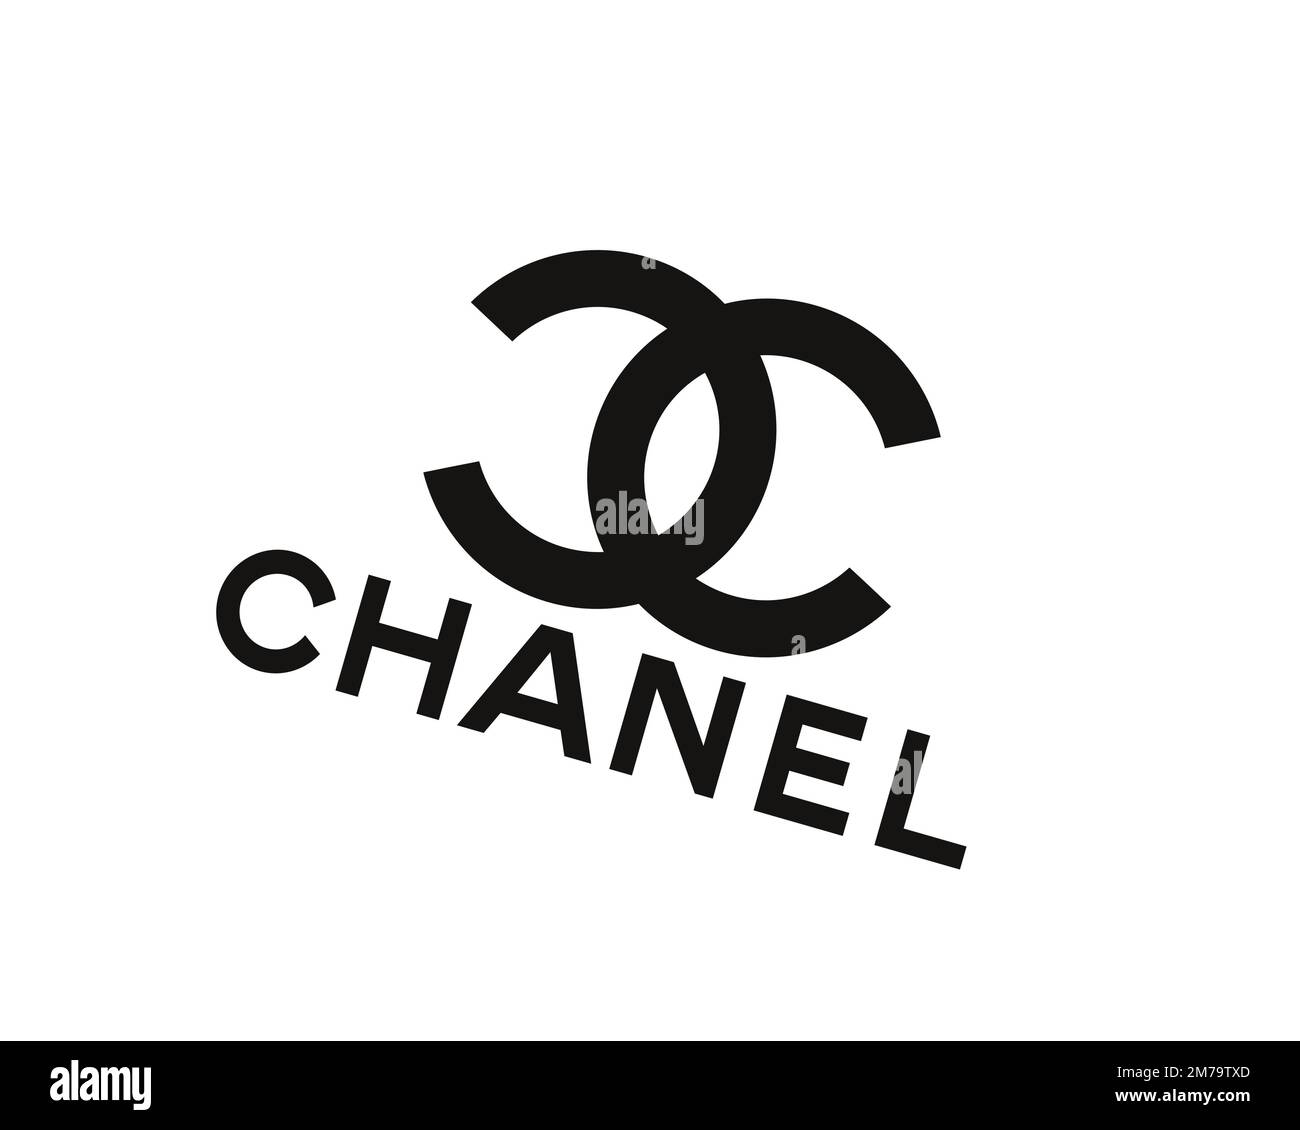 Chanel brand clothes logo symbol with name black Vector Image